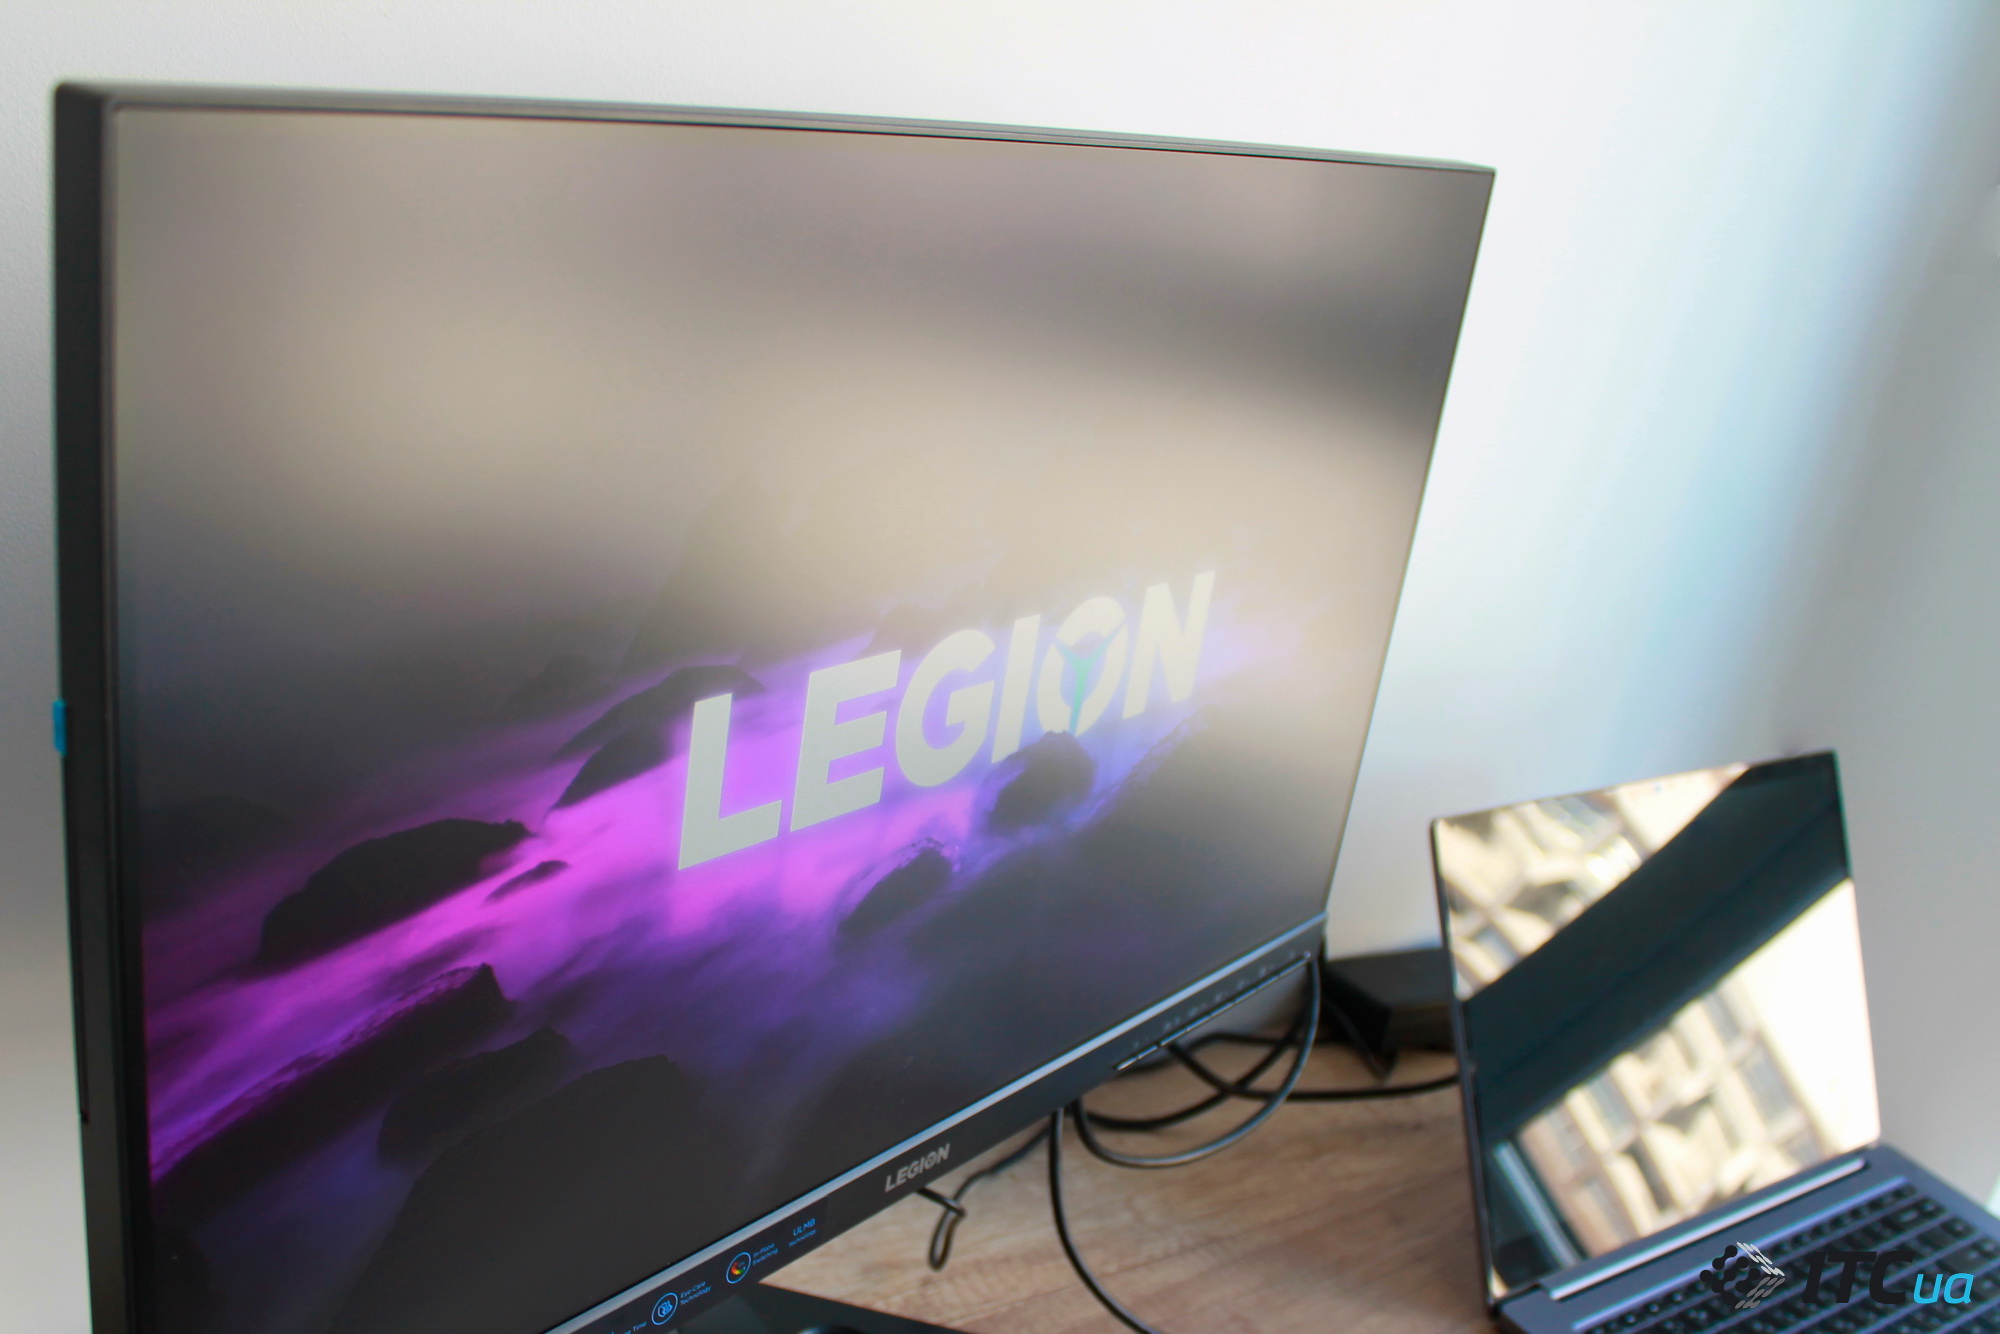 Lenovo Legion Y25g-30 monitor review: Full HD resolution, 360 Hz and 1 millisecond response